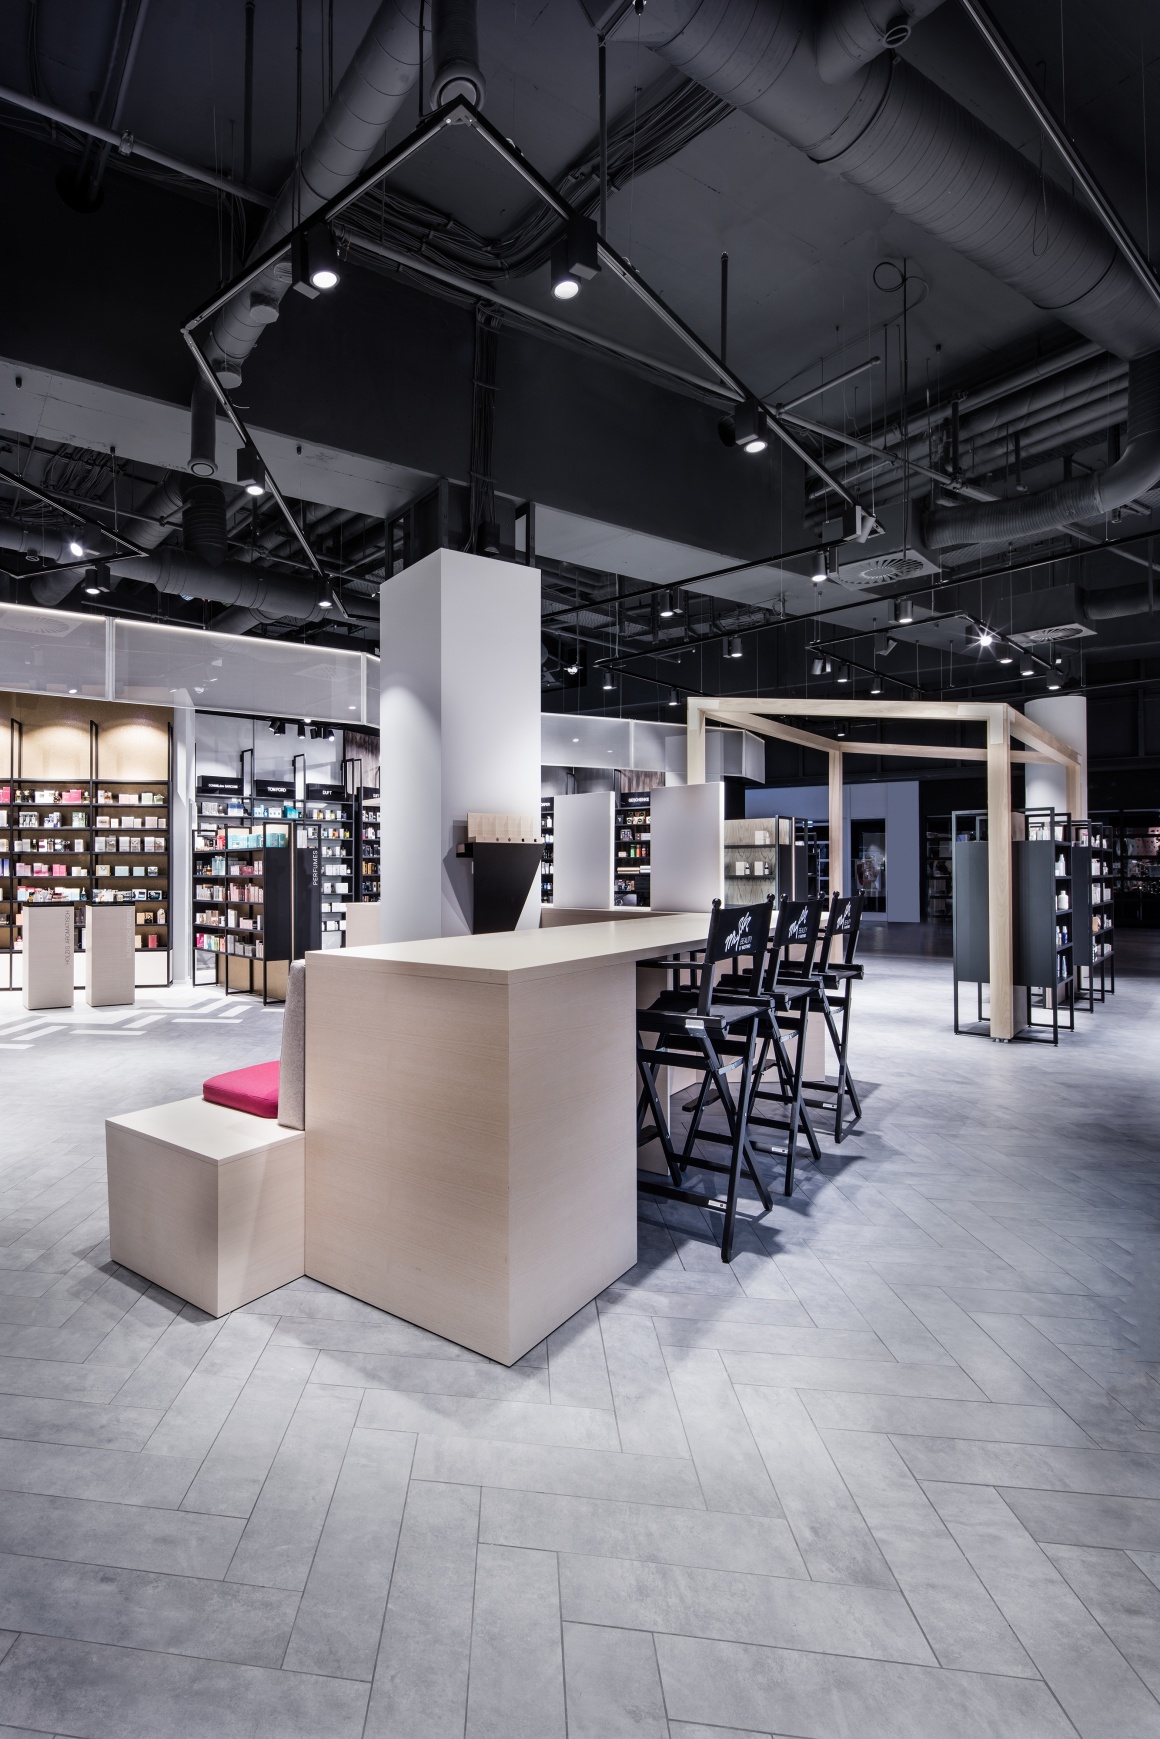 Photo: What shop design can look like: The unique store of Mußler Beauty by...